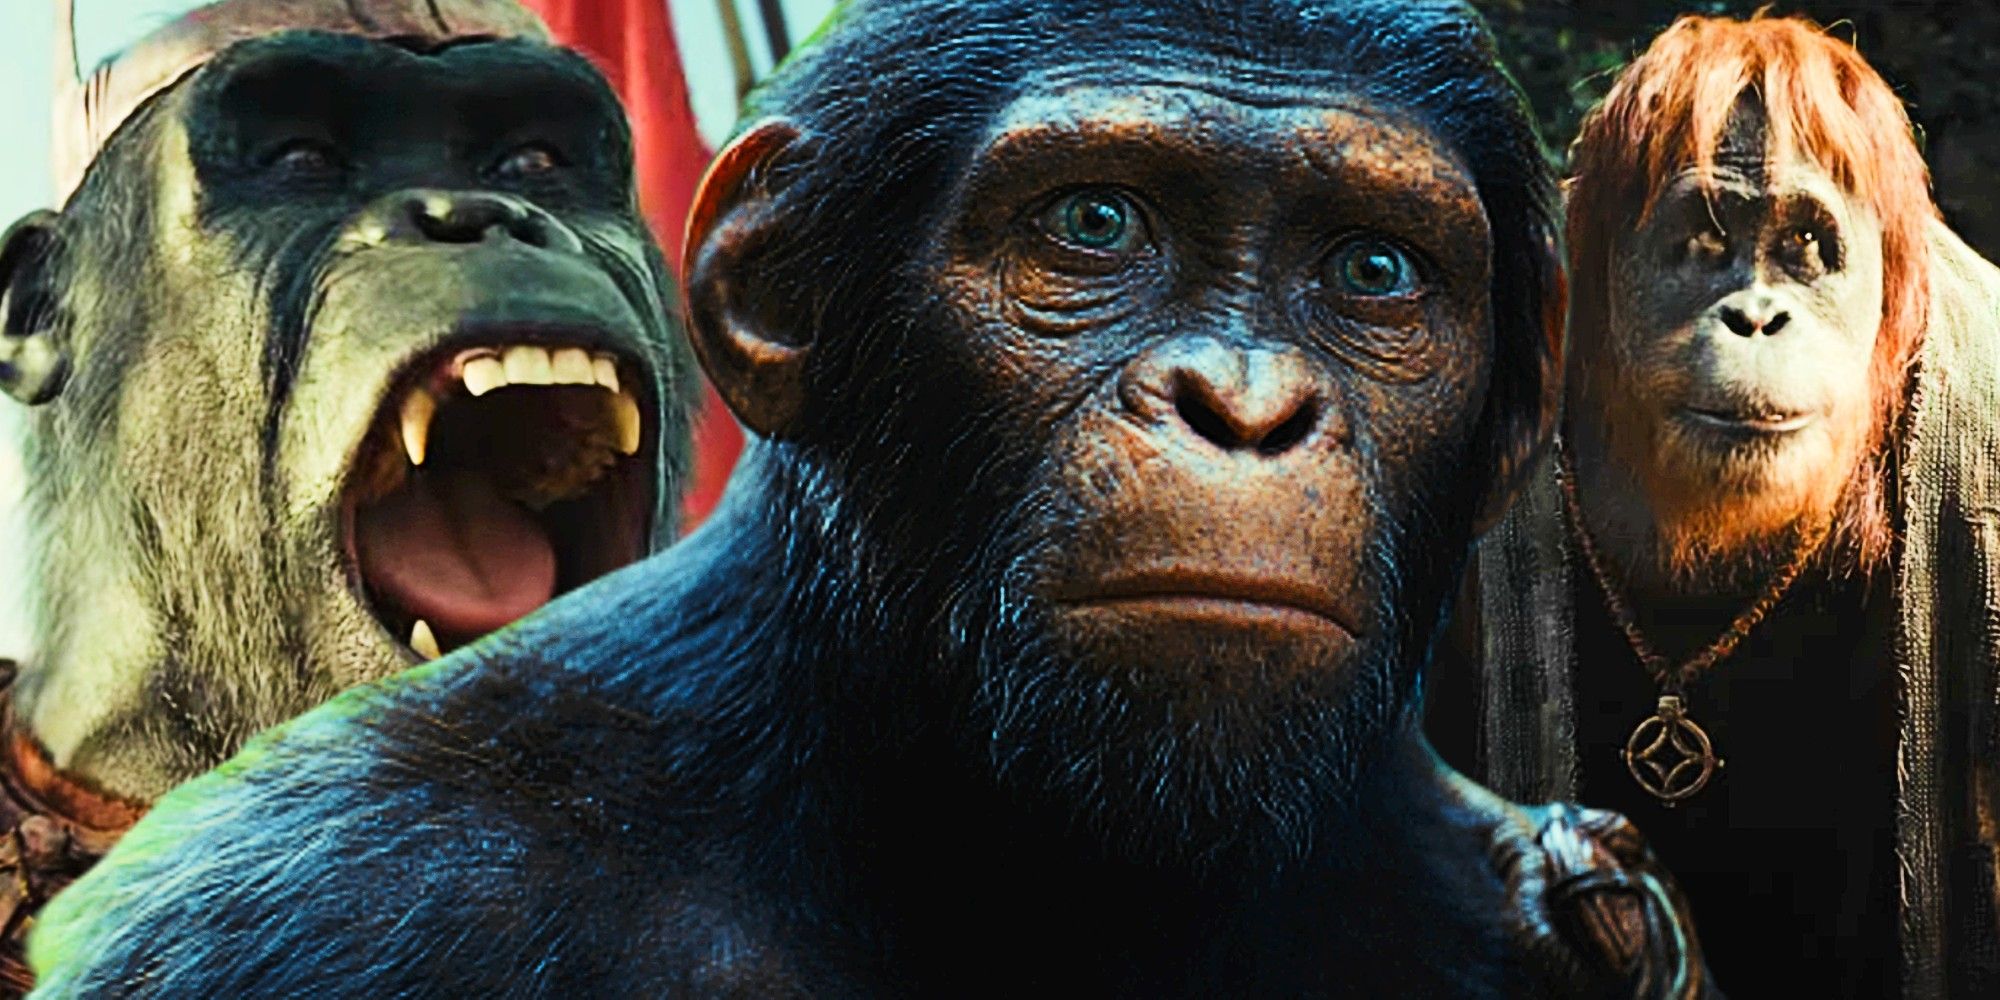 Kingdom-of-the-Planet-of-the-Apes-trailer-story-reveal